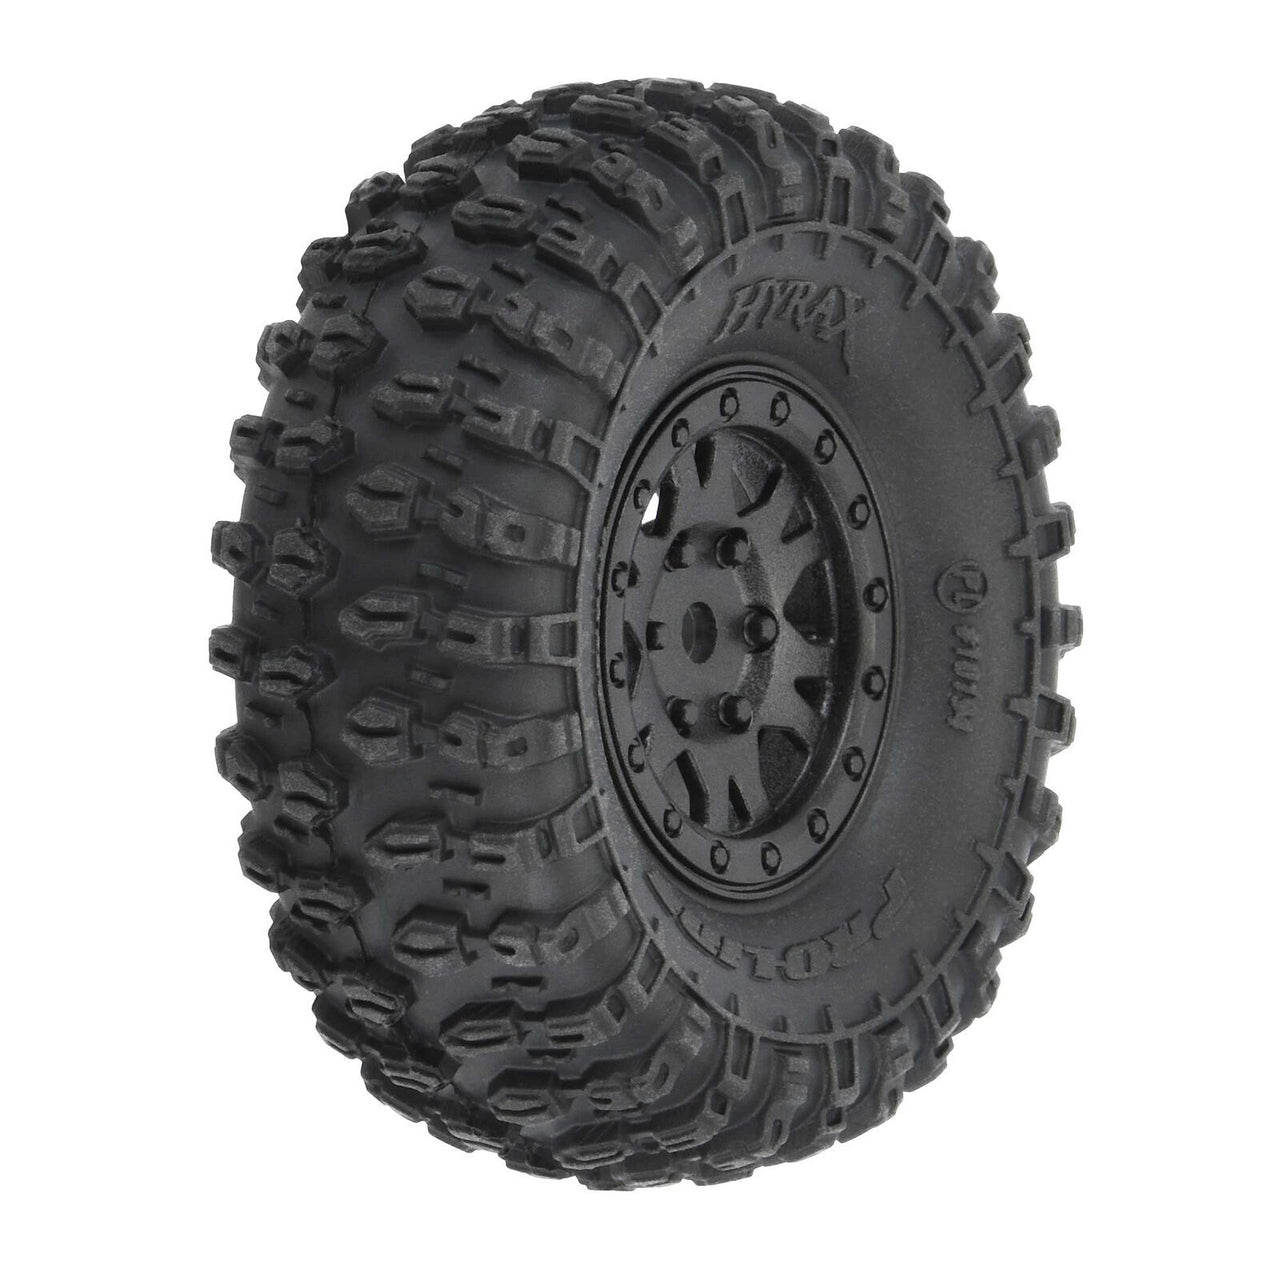 PRO1019410 1/24 Hyrax Front/Rear 1.0" Tires Mounted 7mm Black Impulse (4)